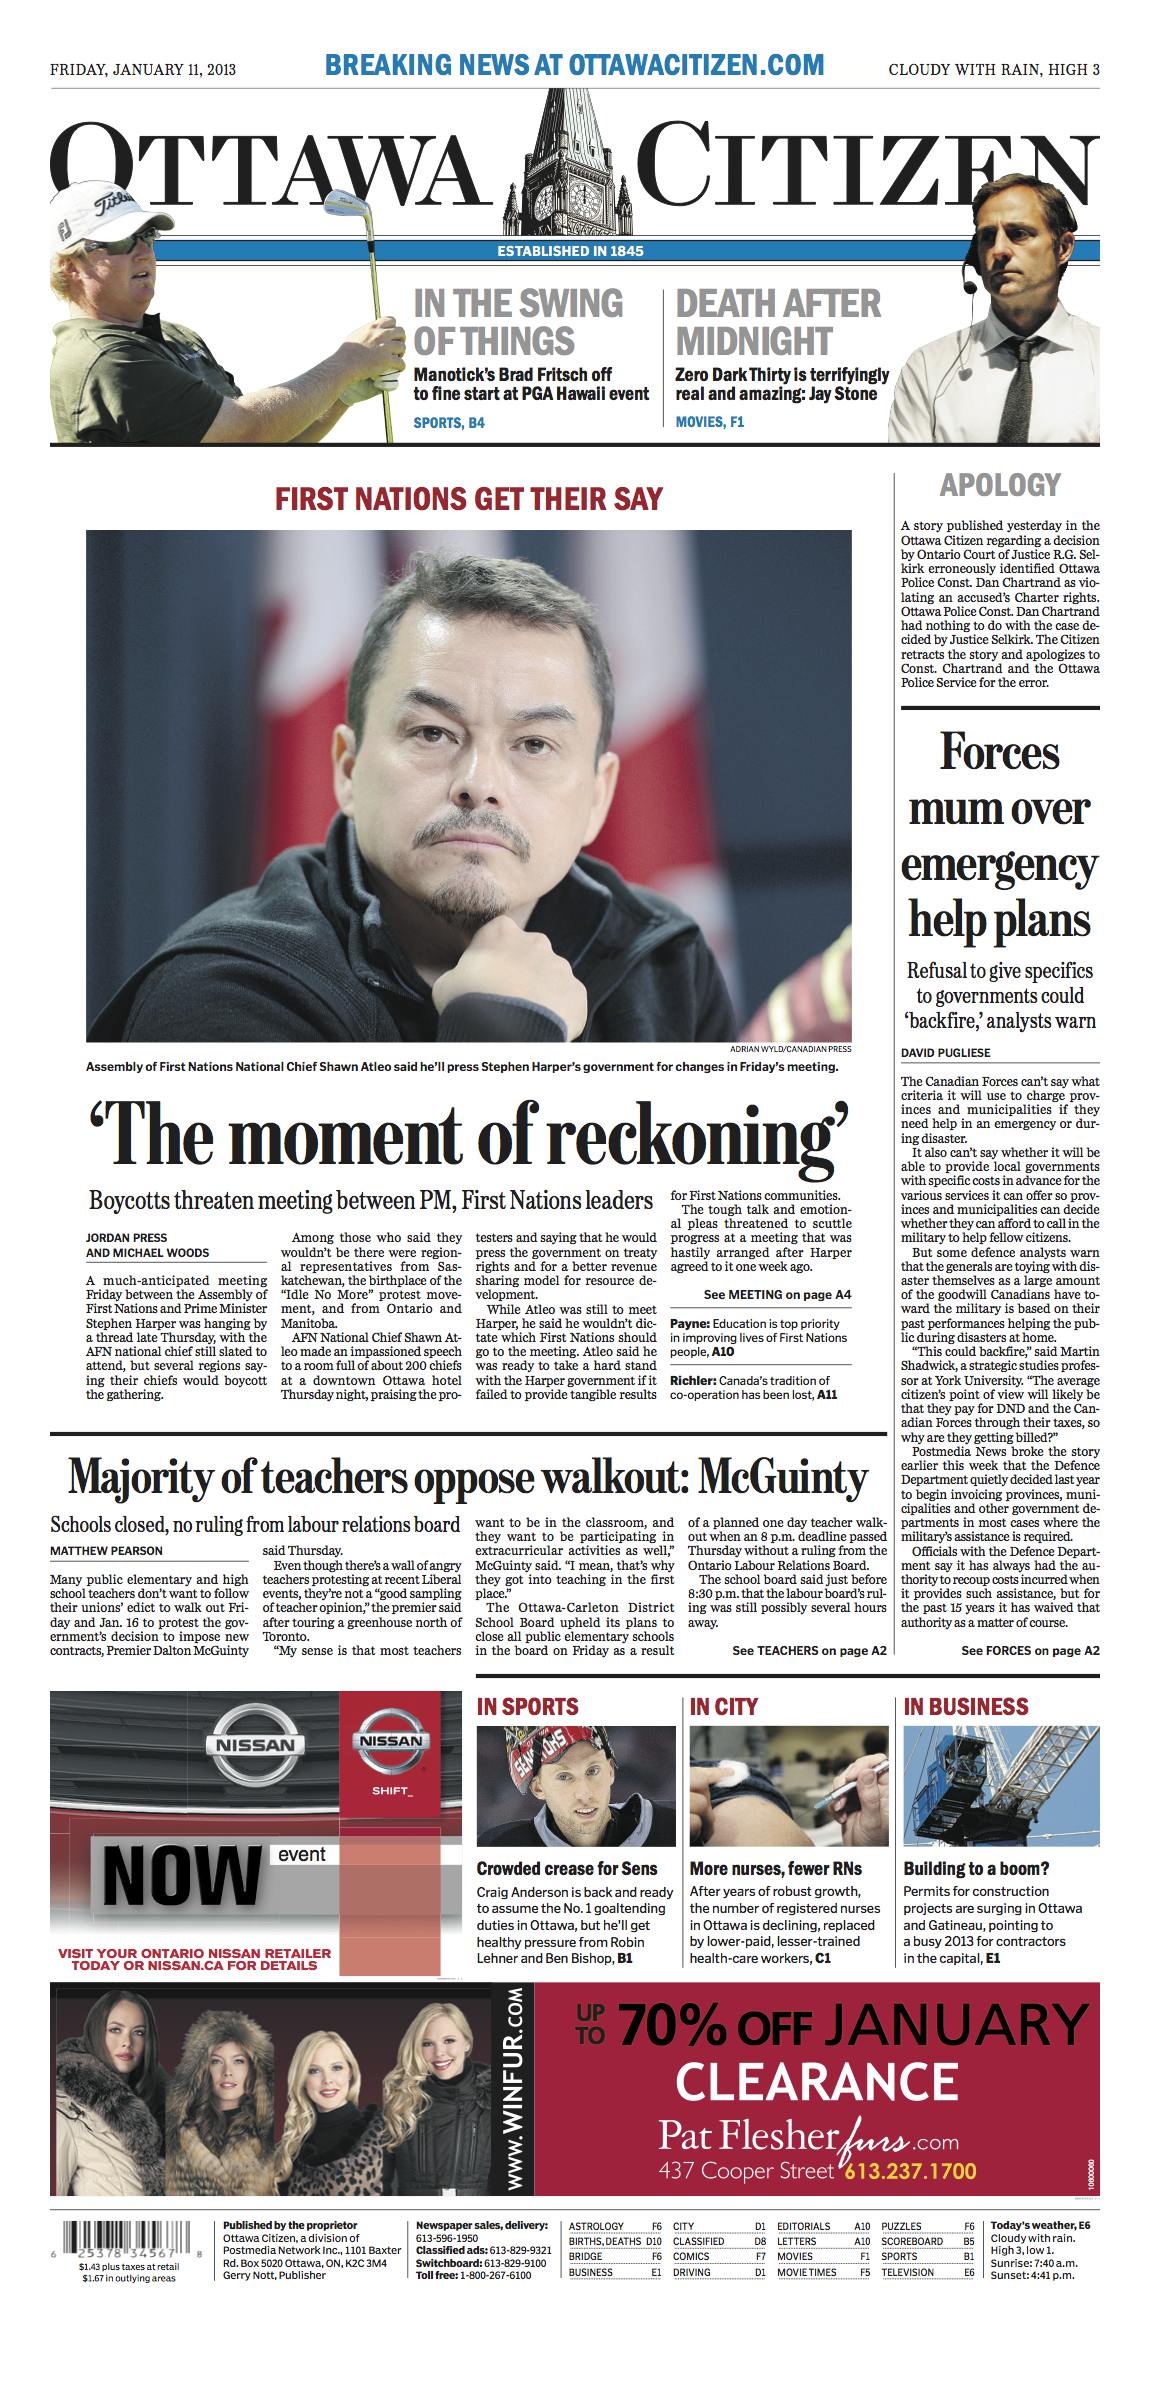 Ottawa Citizen publishes front page apology to police officer - Poynter